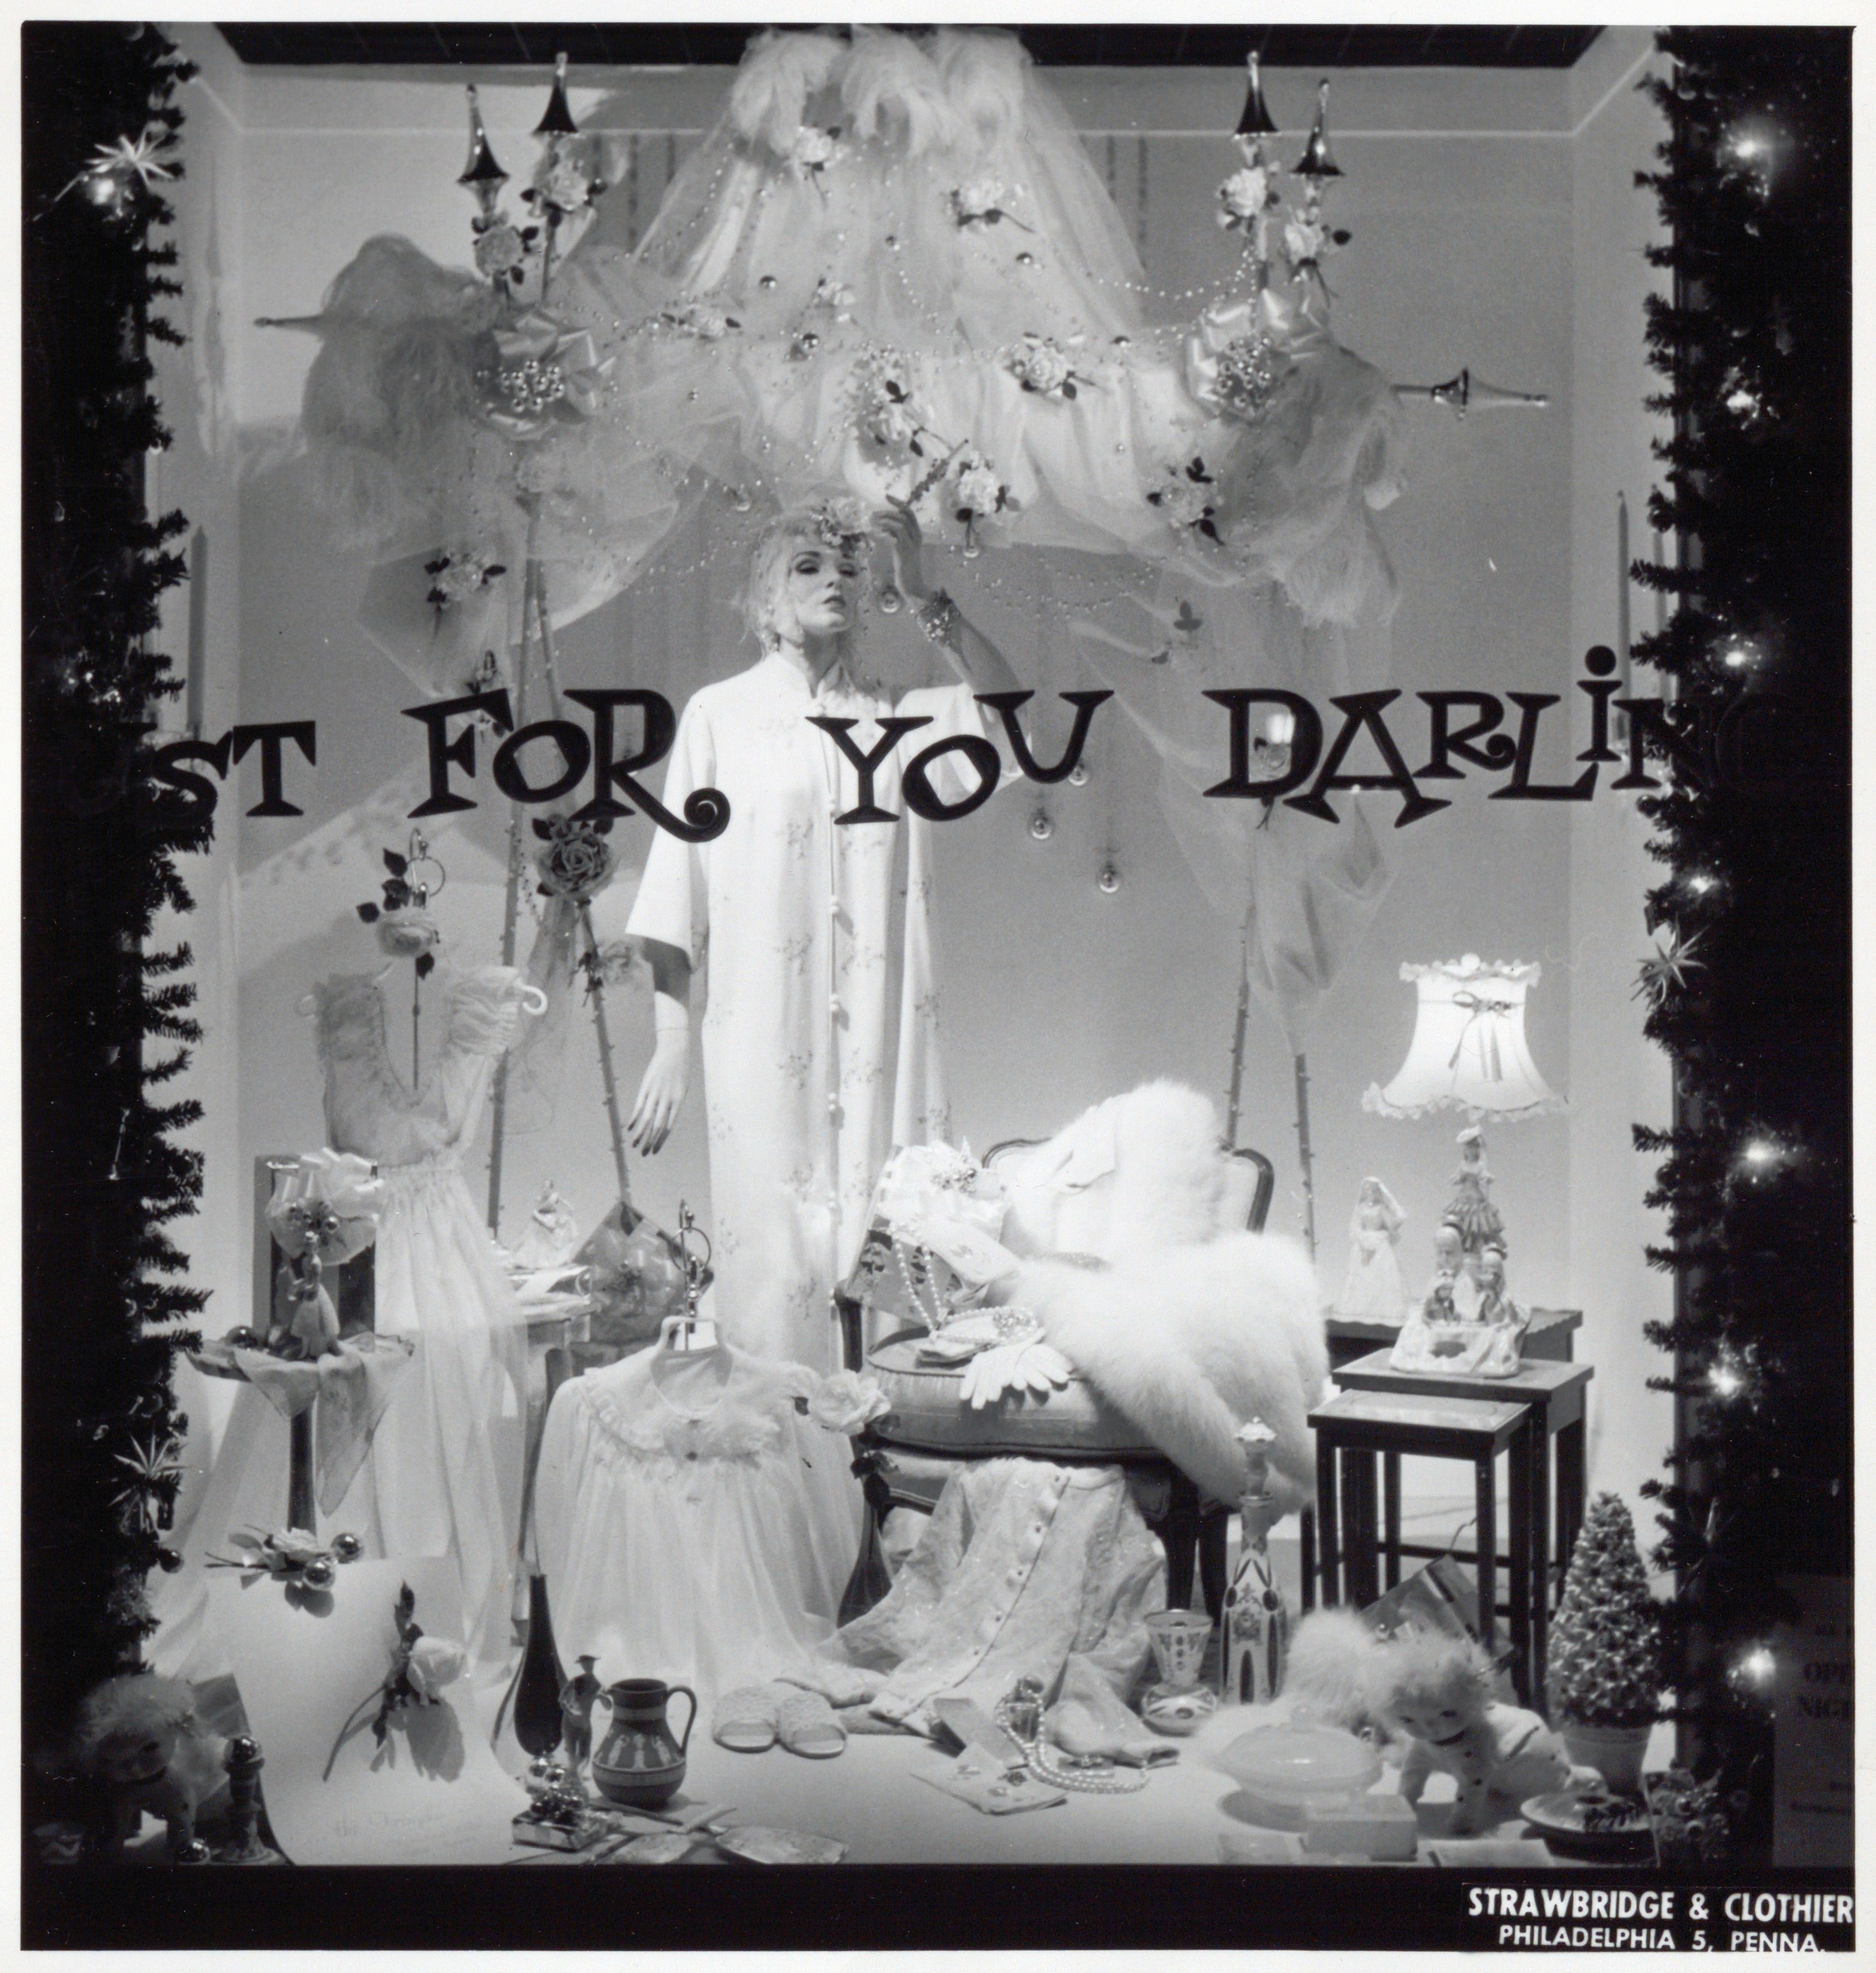 Black and white photograph of a Christmas themed store window display with the phrase 'Just for you darling' painted on the window.